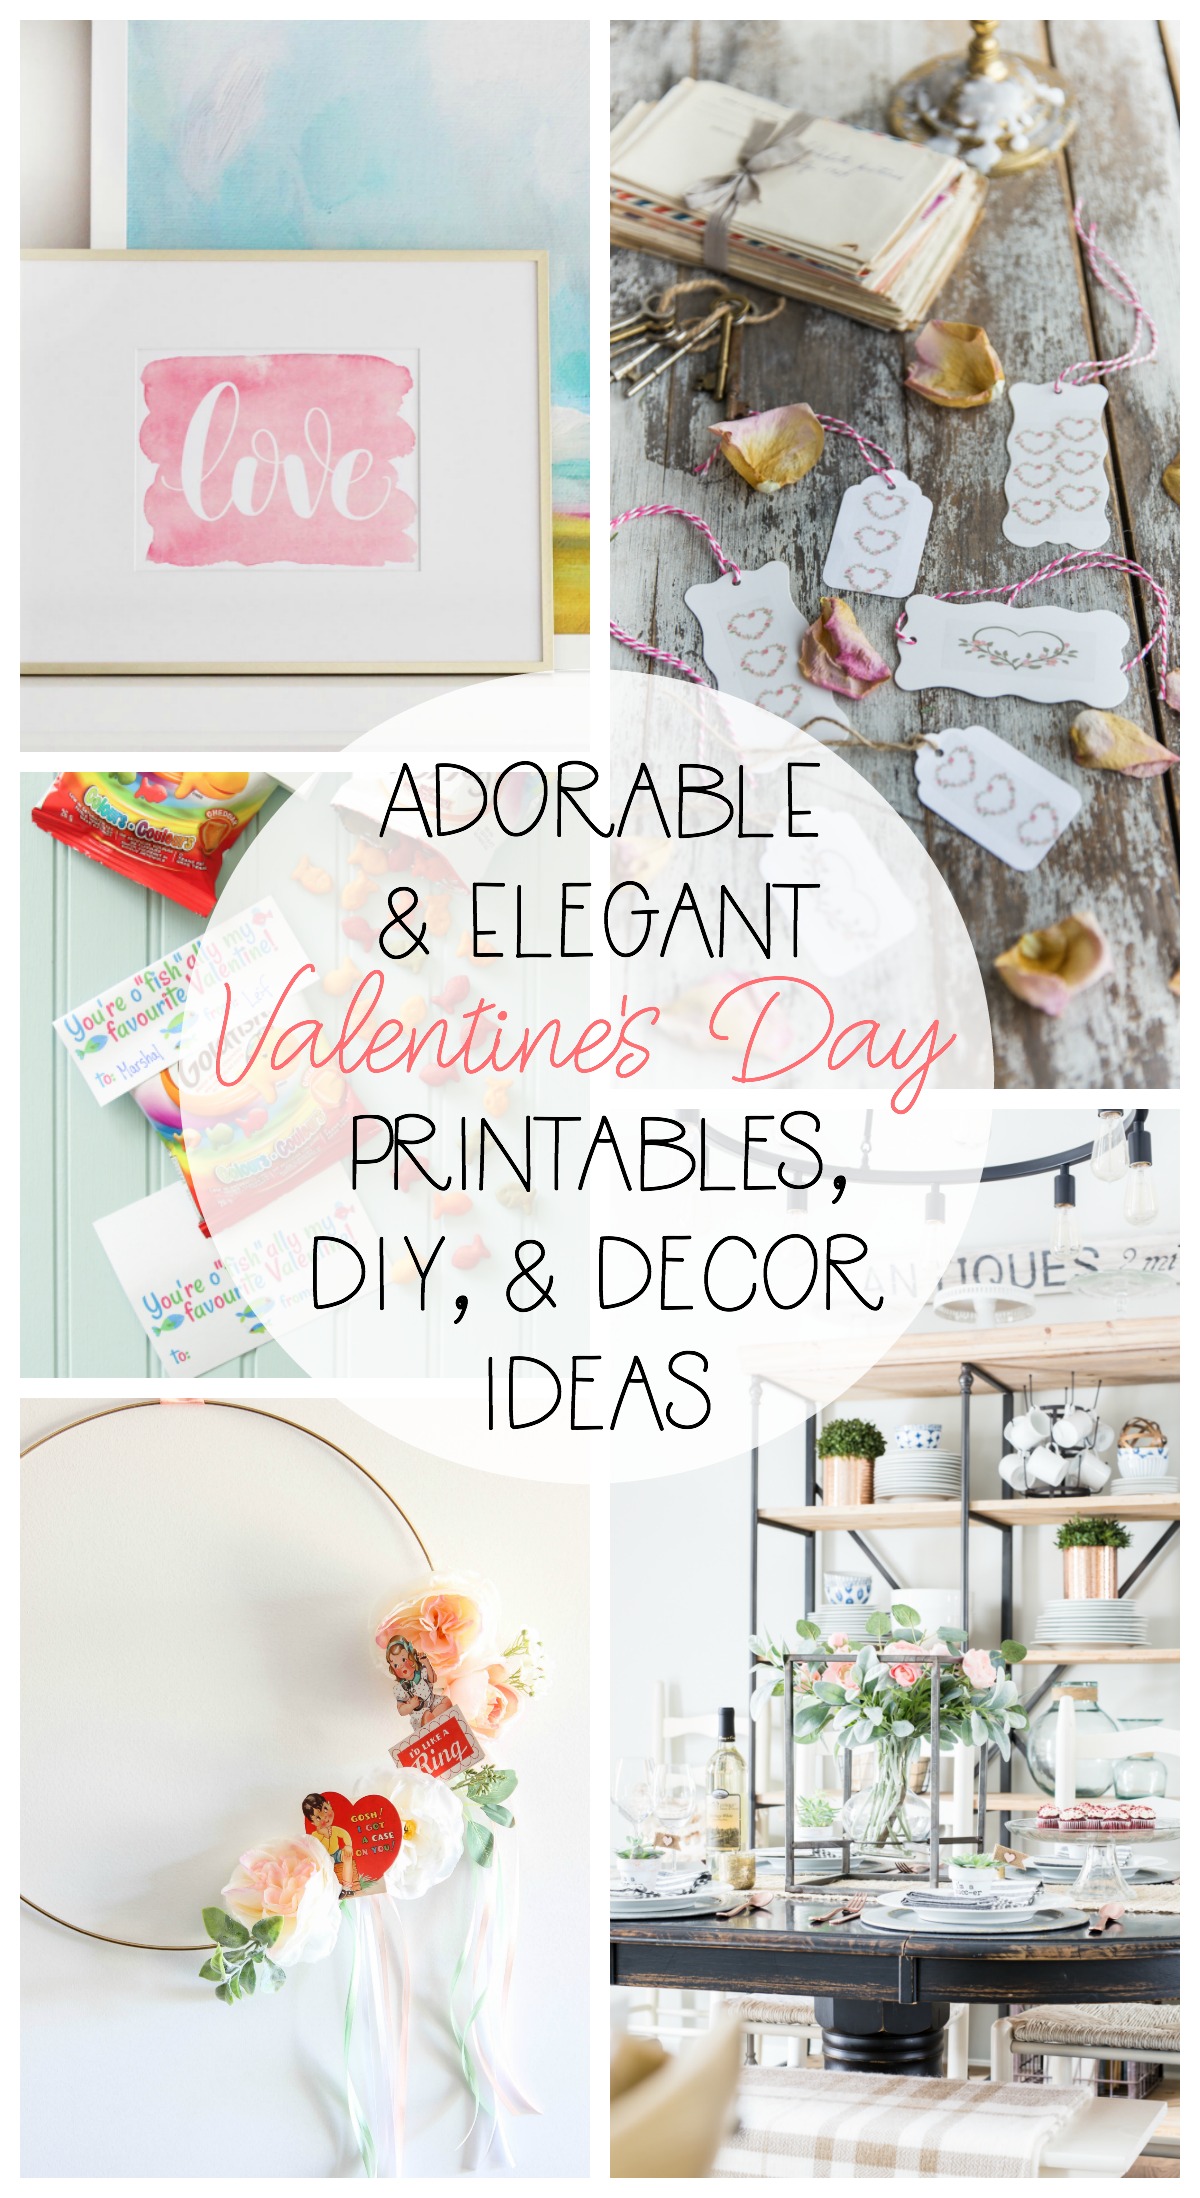 Adorable and elegant Valentine's Day Printables and decor ideas poster.